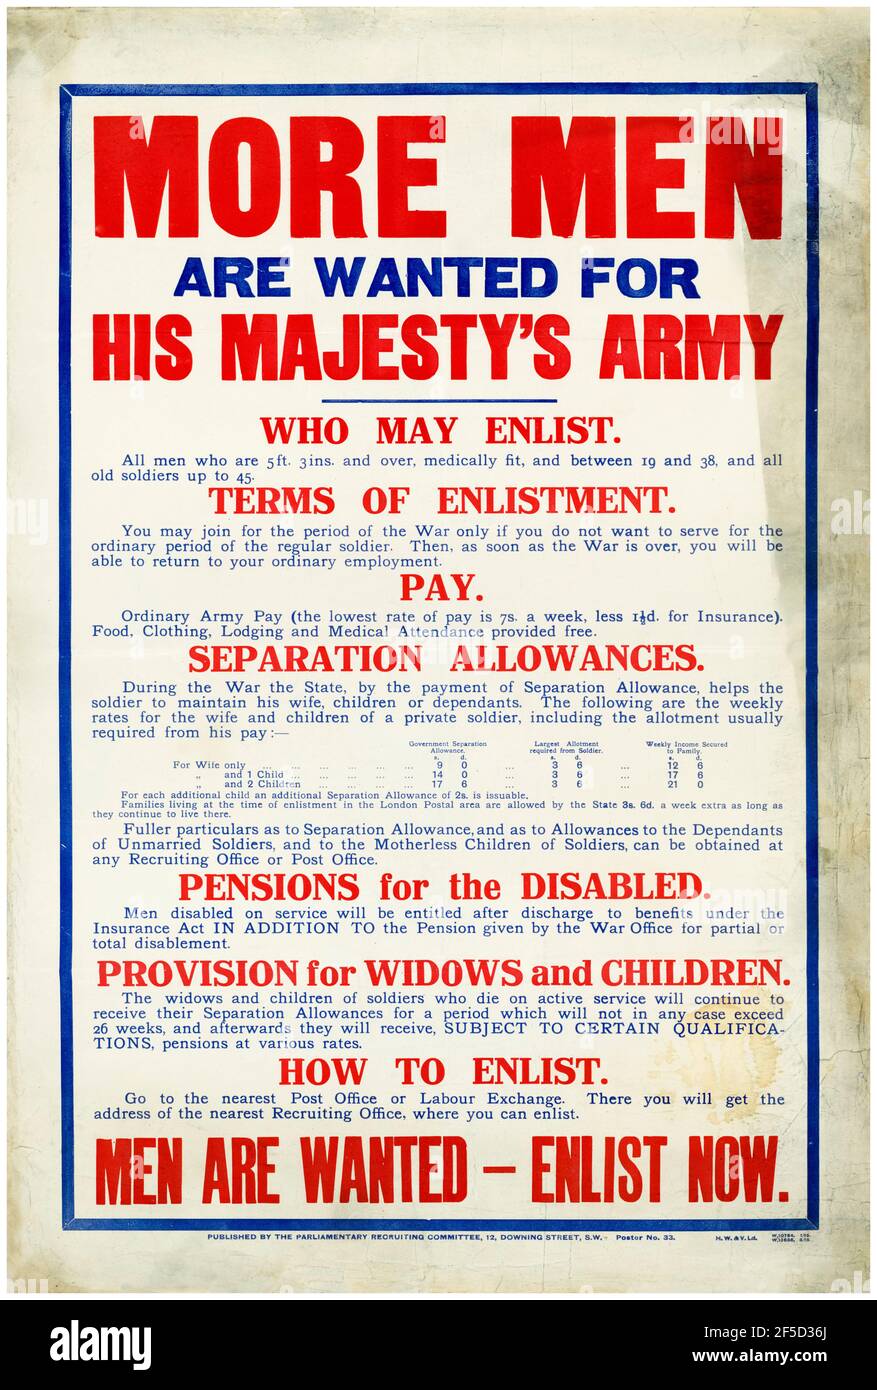 British Army, WW2, Forces Recruitment Poster, More Men Are Wanted for His Majesty's Army, 1942-1945 Stockfoto